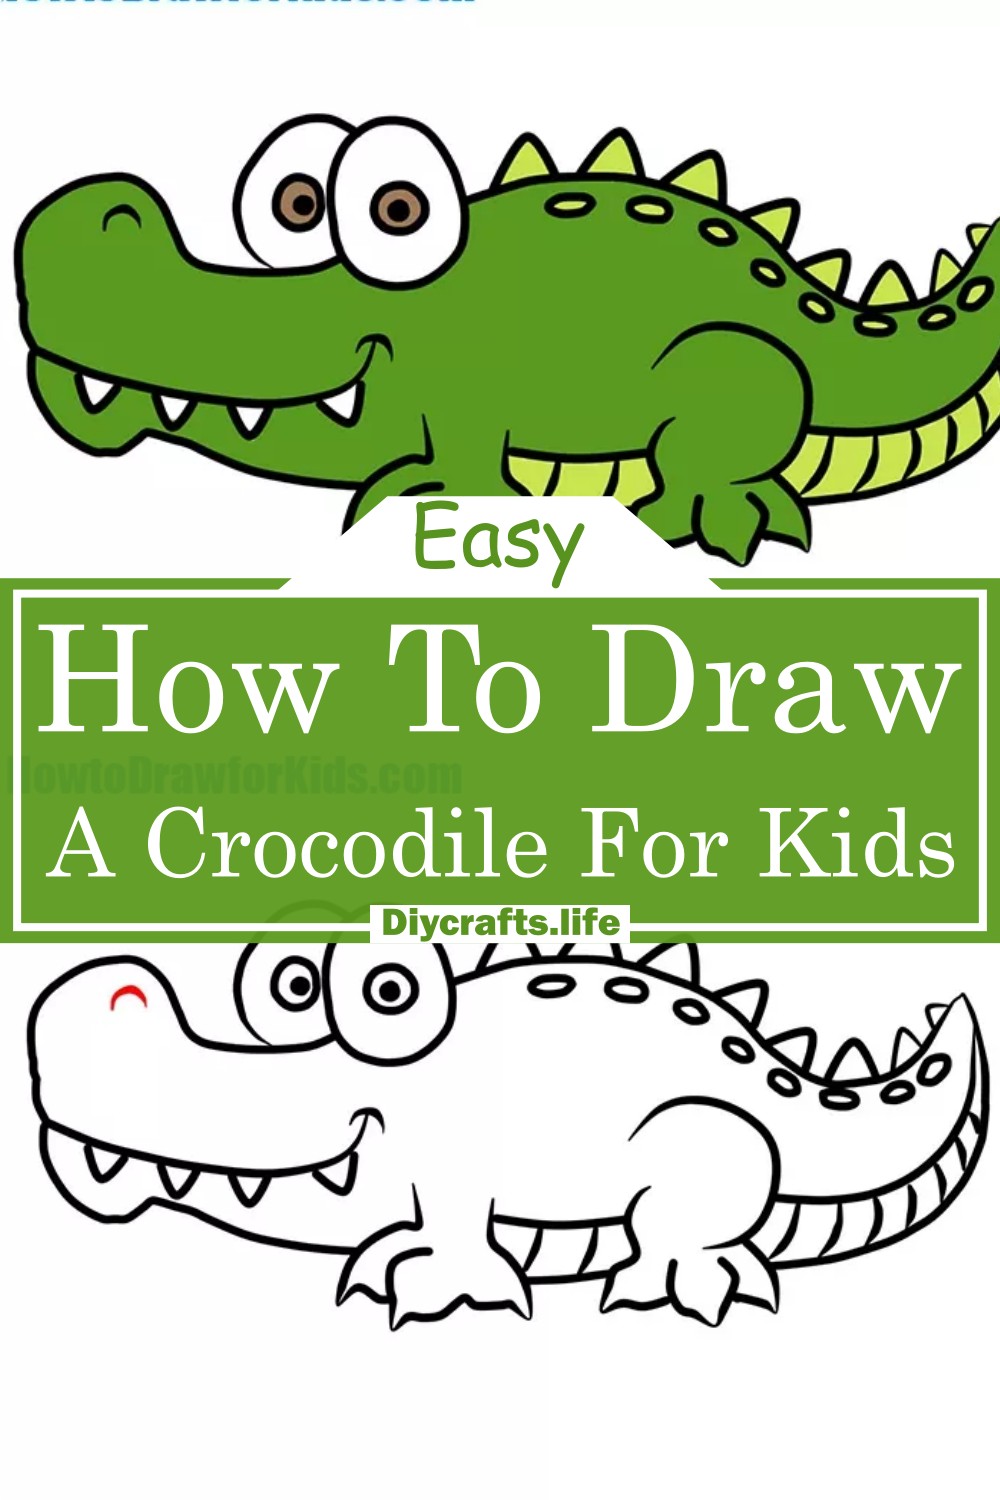 How To Draw A Crocodile For Kids